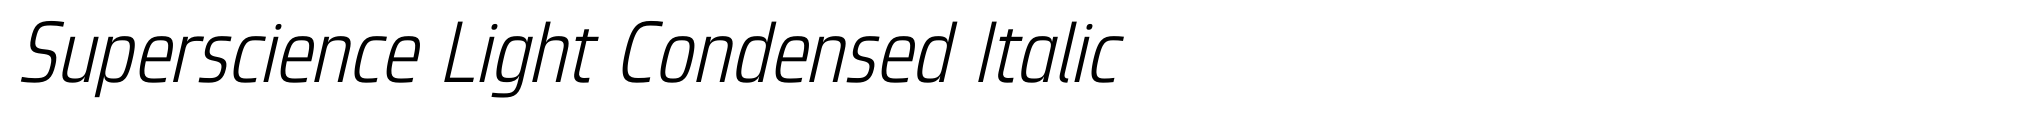 Superscience Light Condensed Italic image